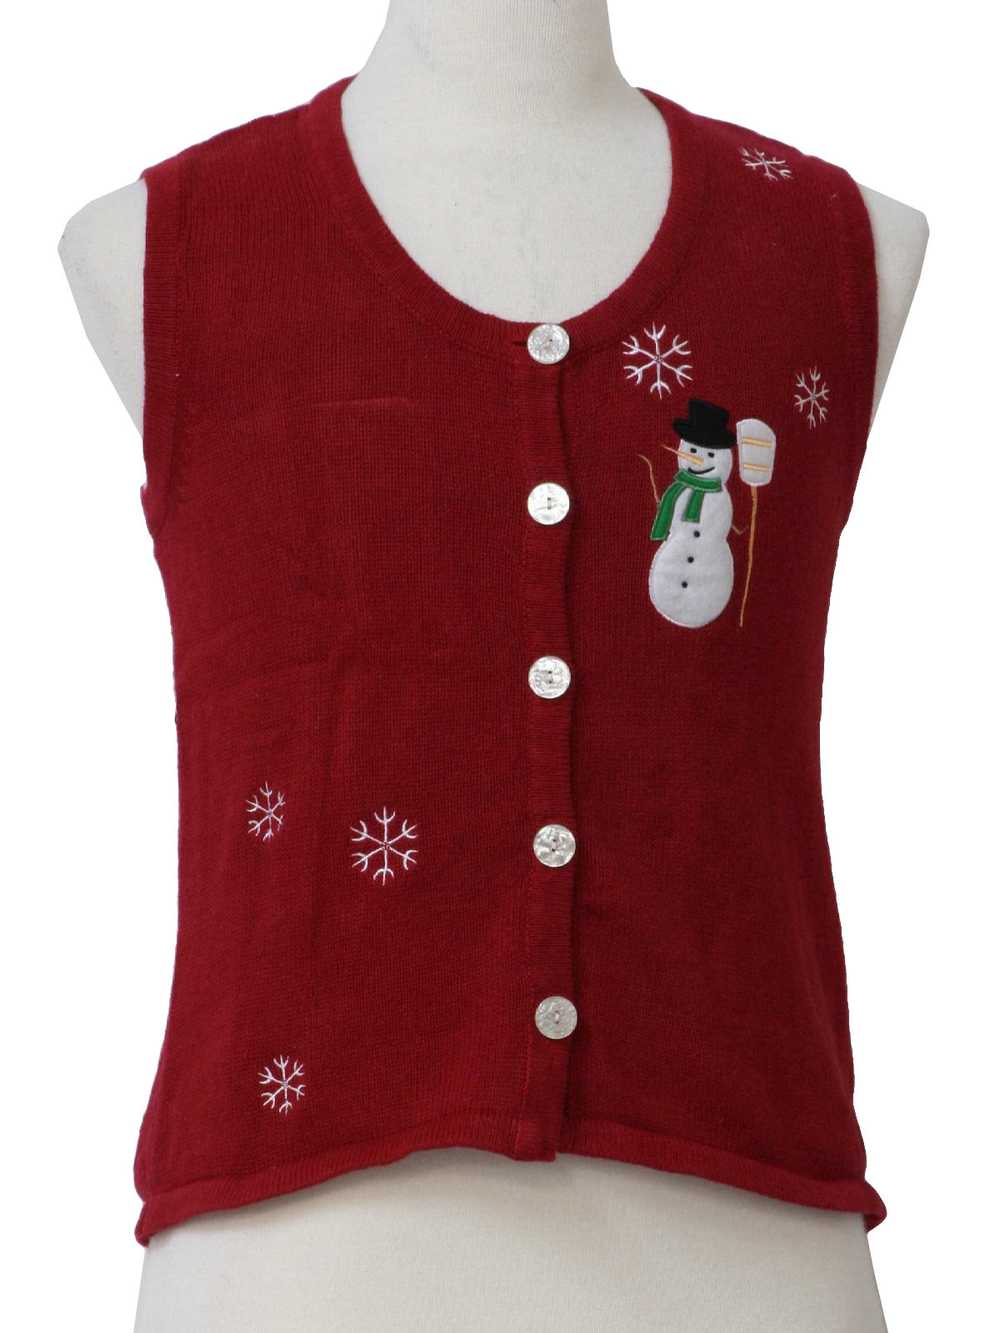 Womens/Childs Ugly Christmas Sweater vest - image 1